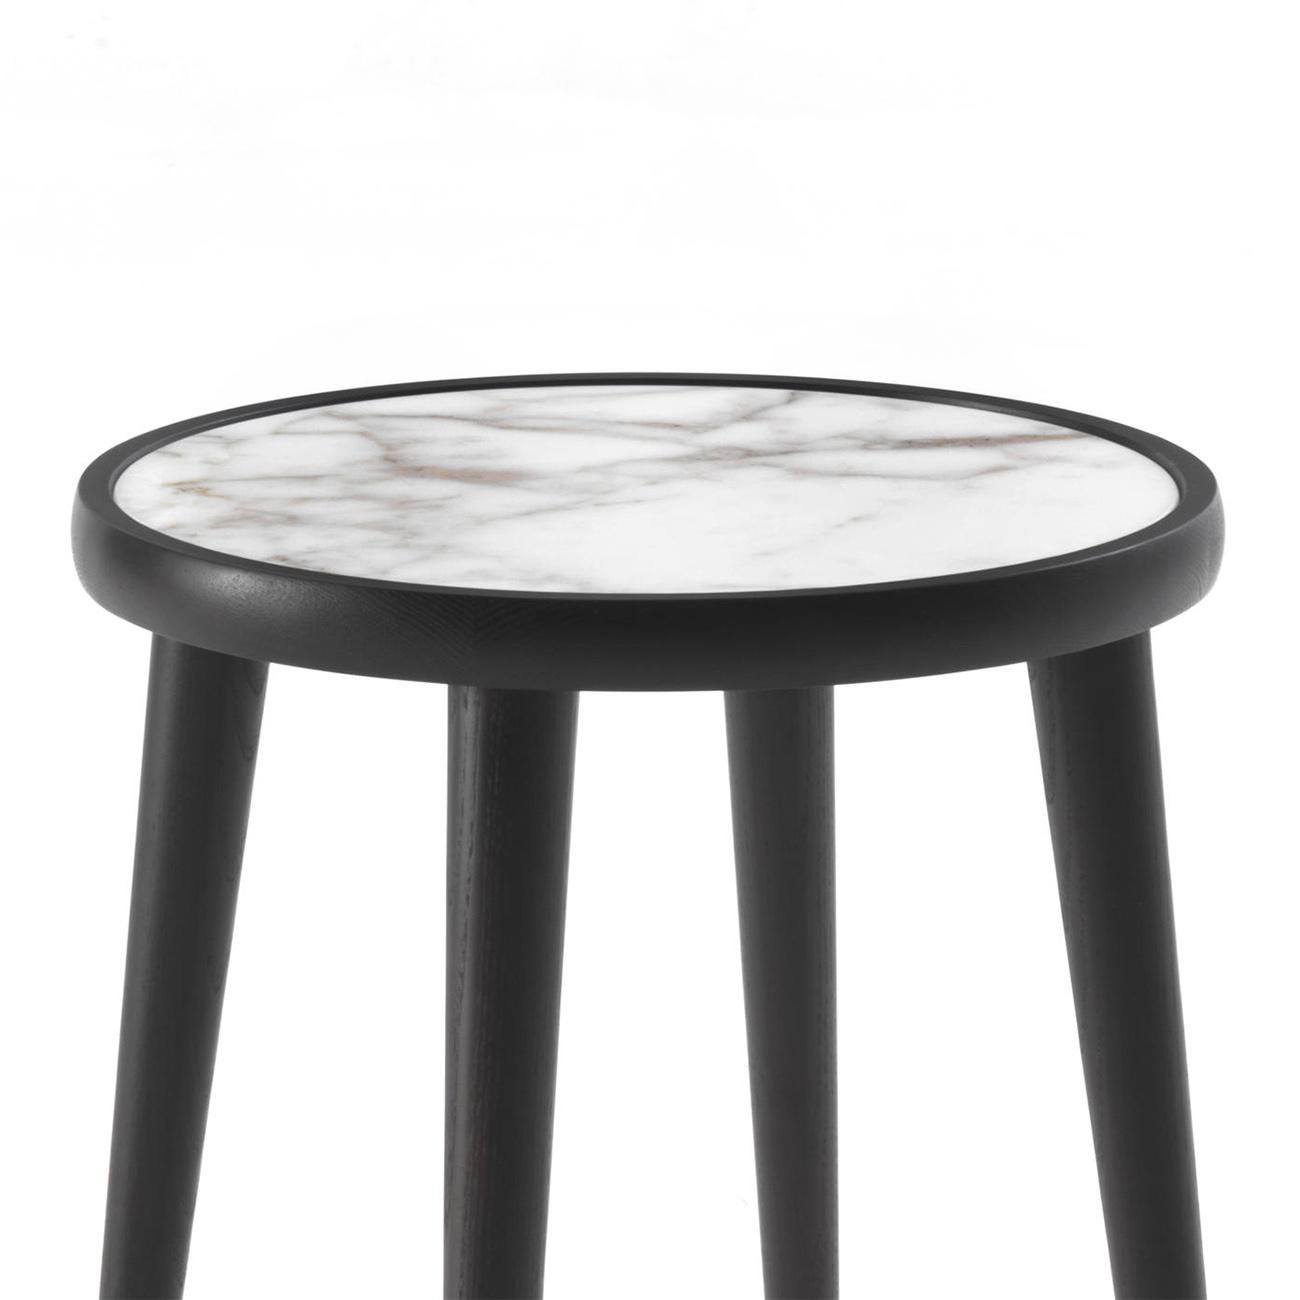 Side Table Domio Marble with solid ash base in
blackened stained finish. With solid white calacatta
marble top in polished finish.